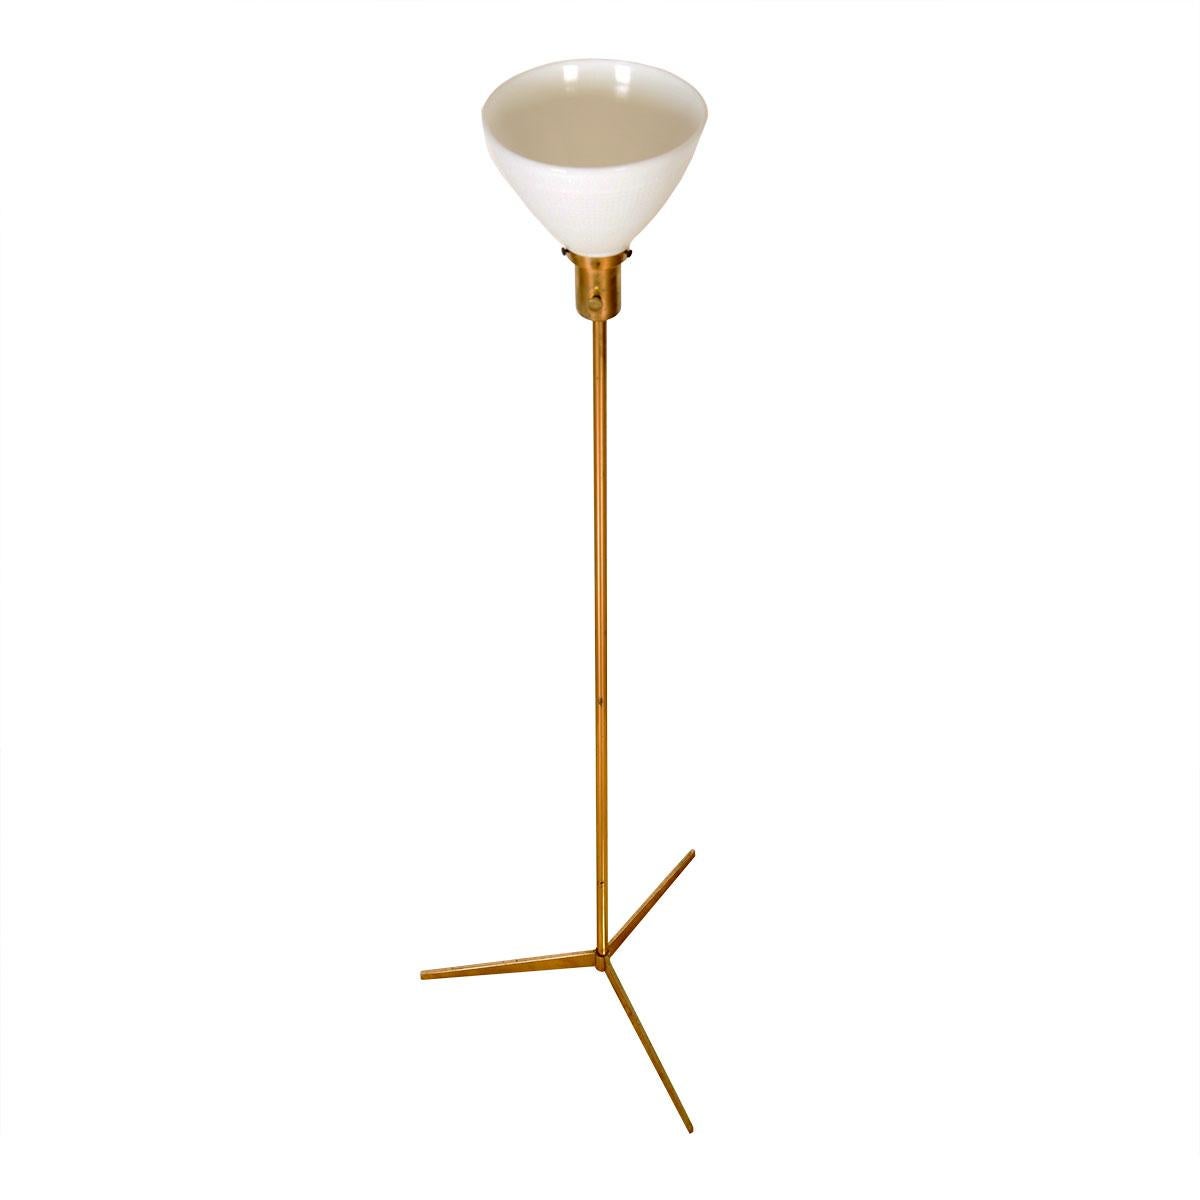 Subtle details make this torchiere lamp by Paul McCobb an MCM Classic. An open milk-glass light perches atop a brass pole with a 3-pronged base.

